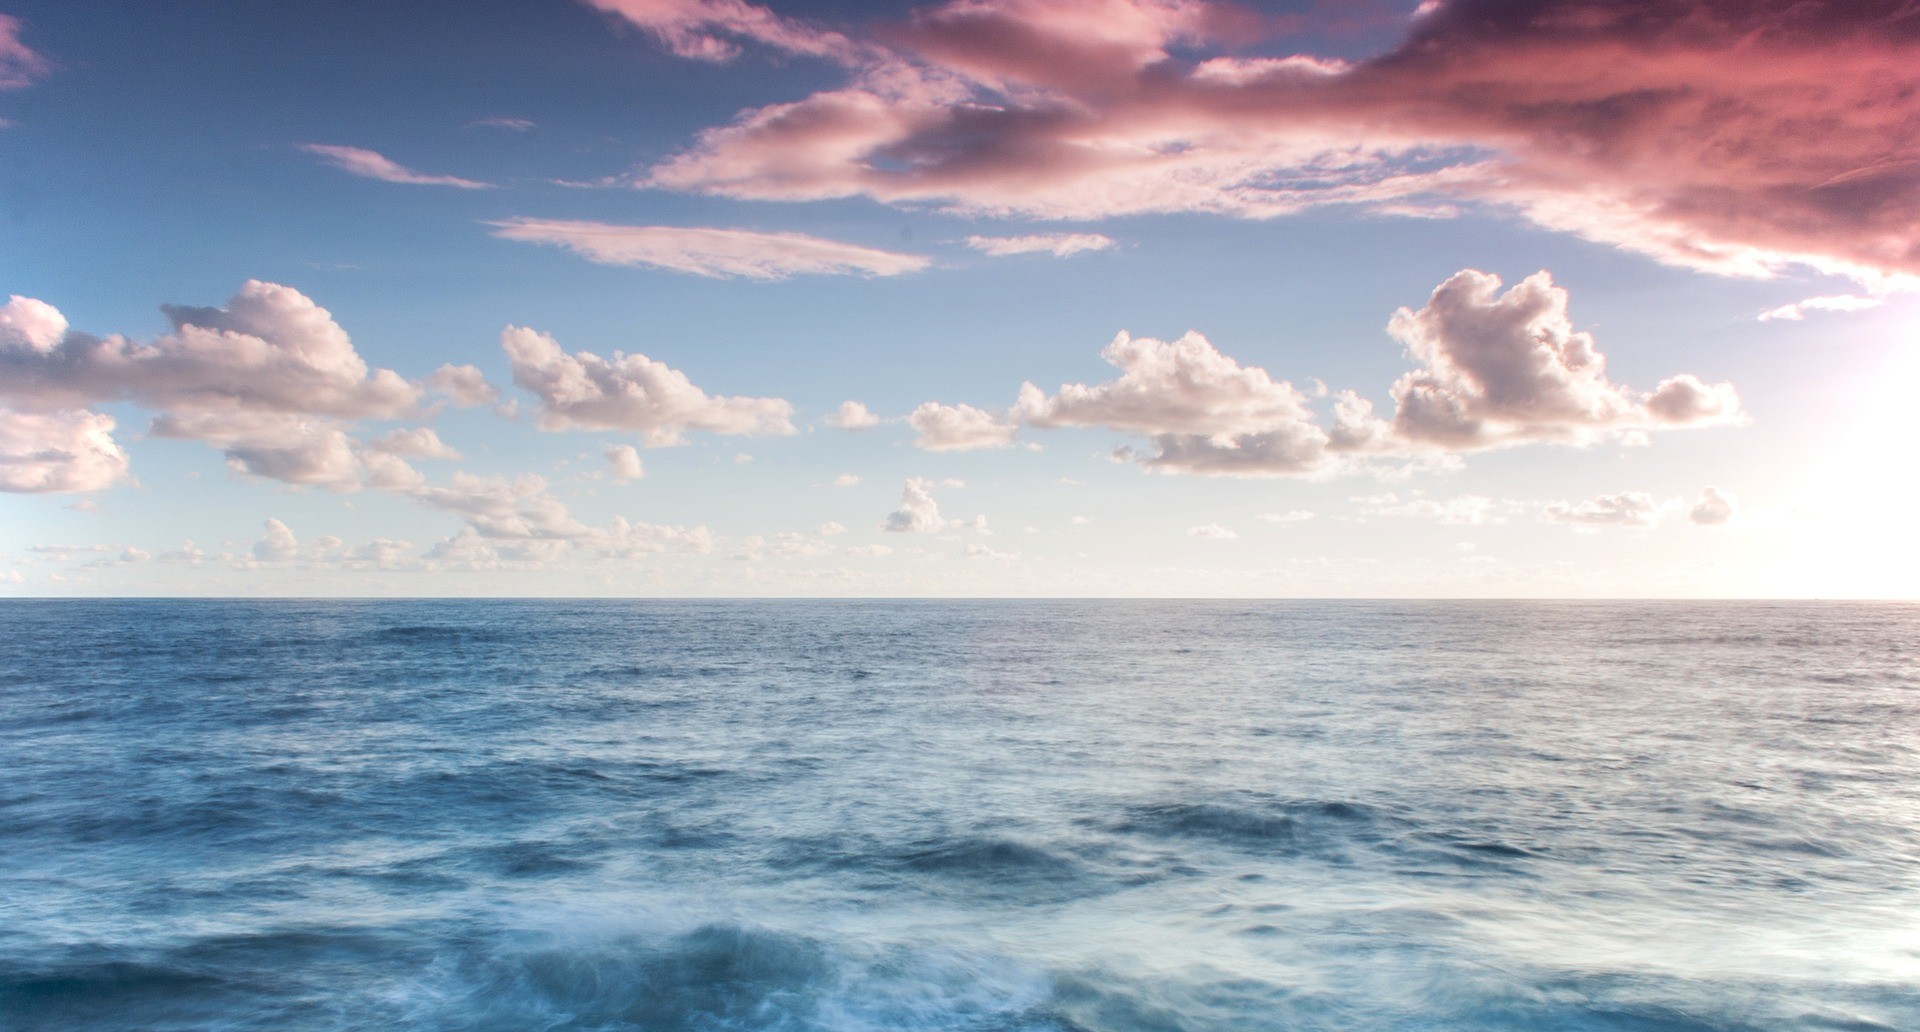 An image taken at sea, with clouds visible over calm waters